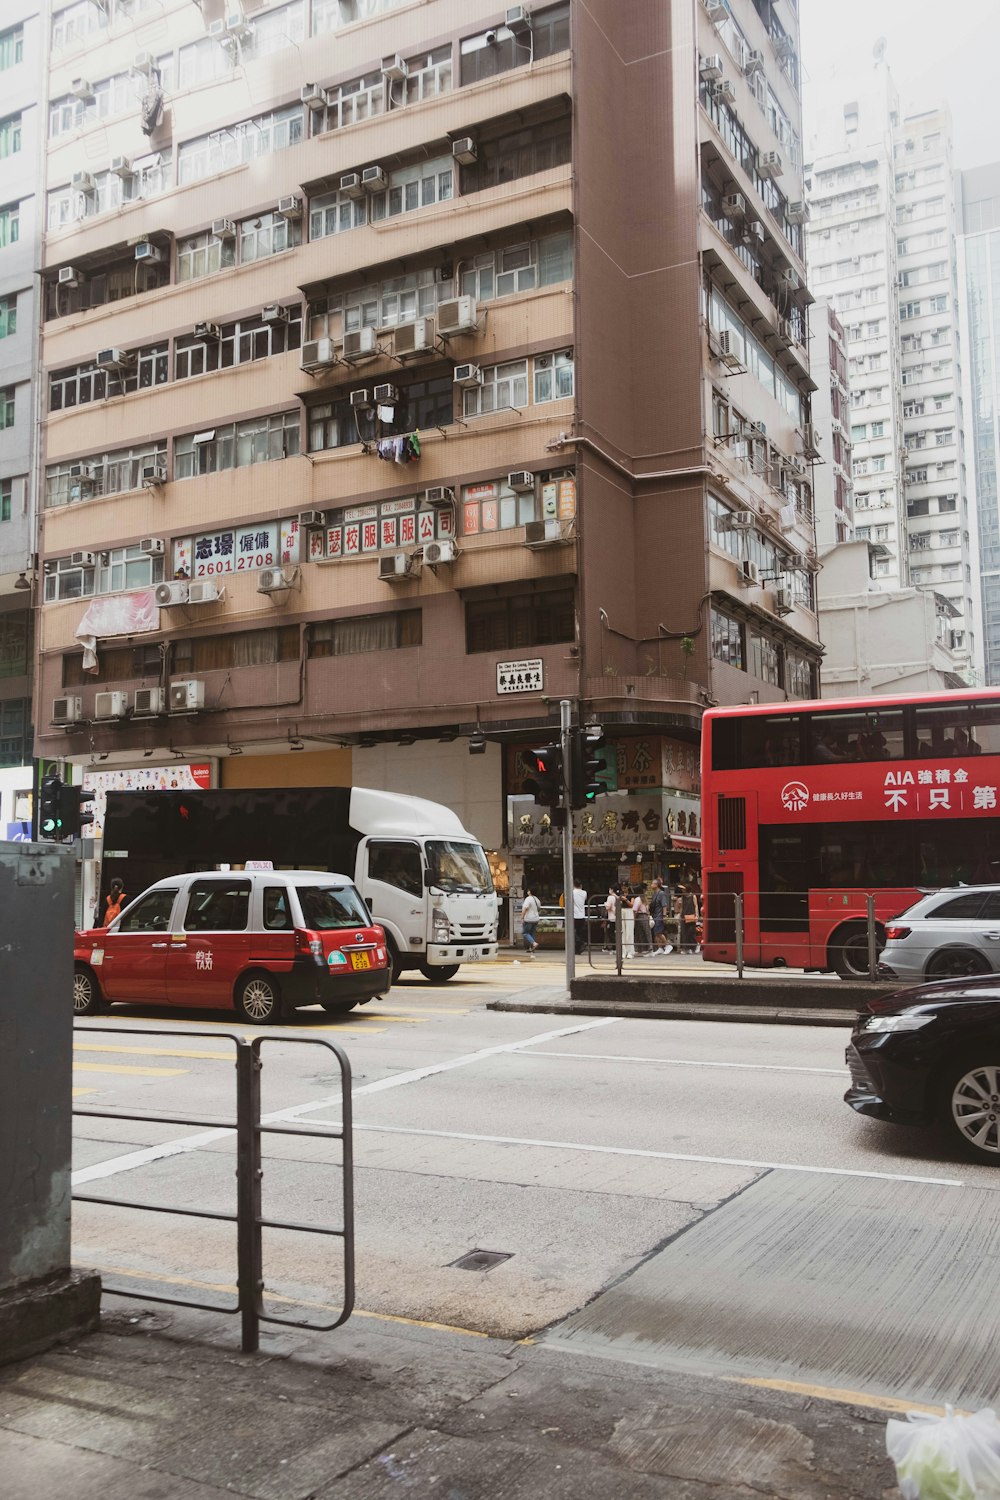 a red double decker bus driving past a tall building